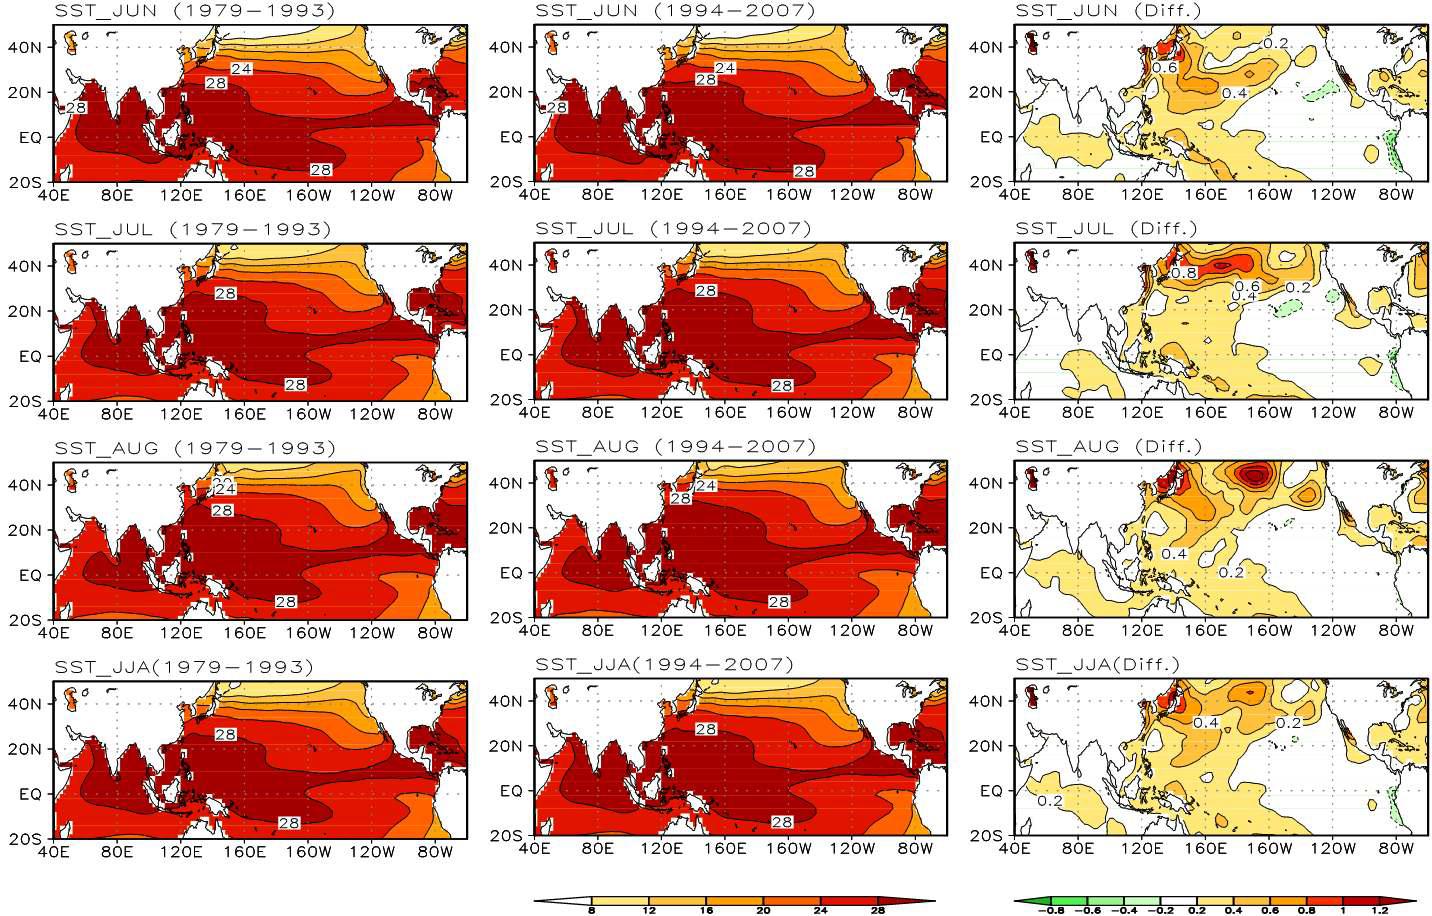 Spatial distributions of mean June, July, August, and JJA sea surface temperature (SST) in periods of 1979-1993 and 1994-2007, and their differences.